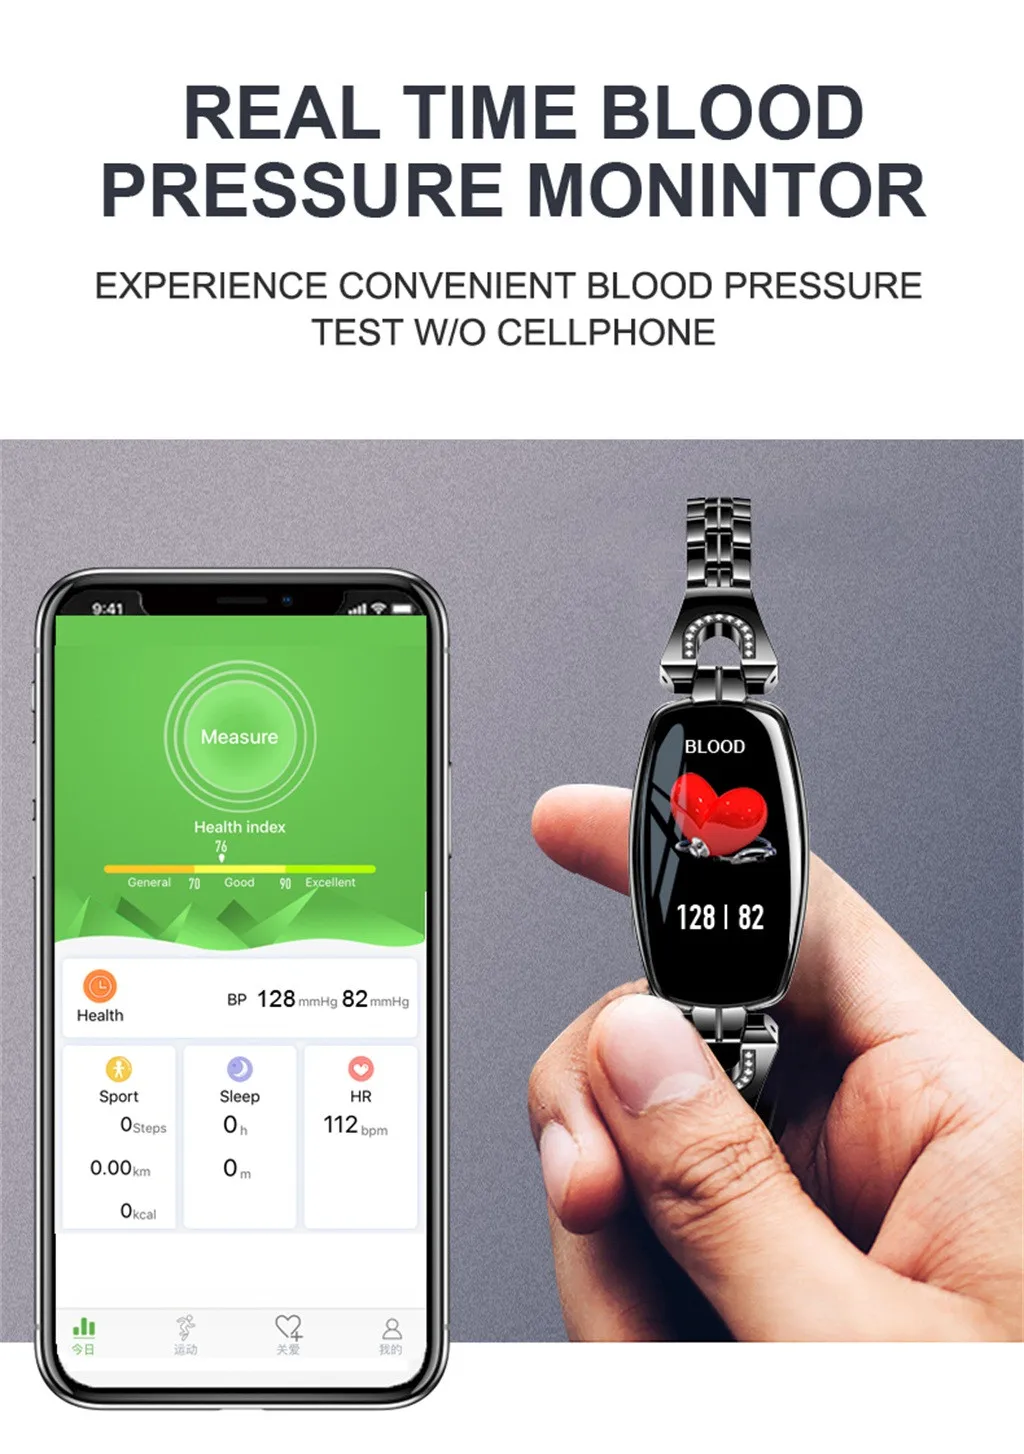 Women Smart Watch H8 Smart Bracelet Reloj Blood Pressure Heart Rate Monitor Fitness Tracker Sport Wristband For Android iOS Lady